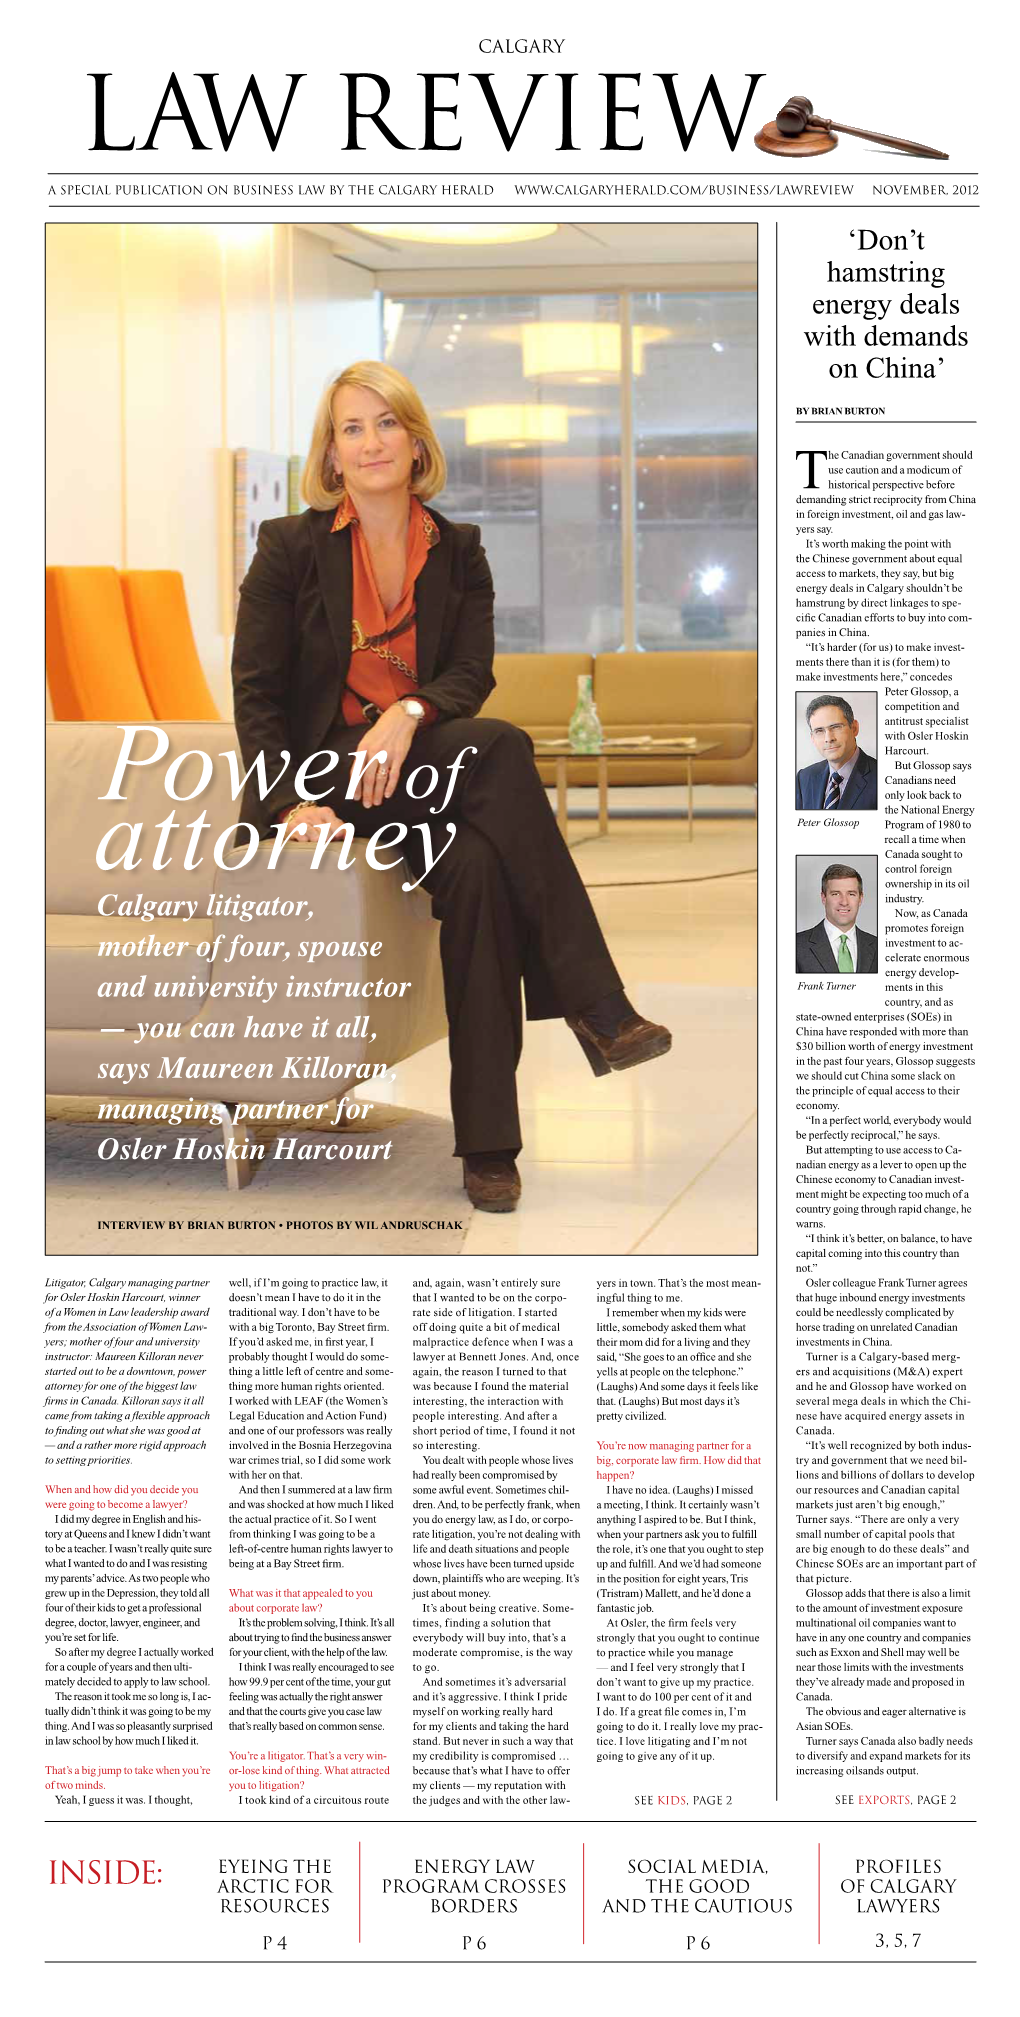 INSIDE: Calgary Litigator, Mother of Four, Spouse and University Instructor — You Can Have It All, Says Maureen Killoran